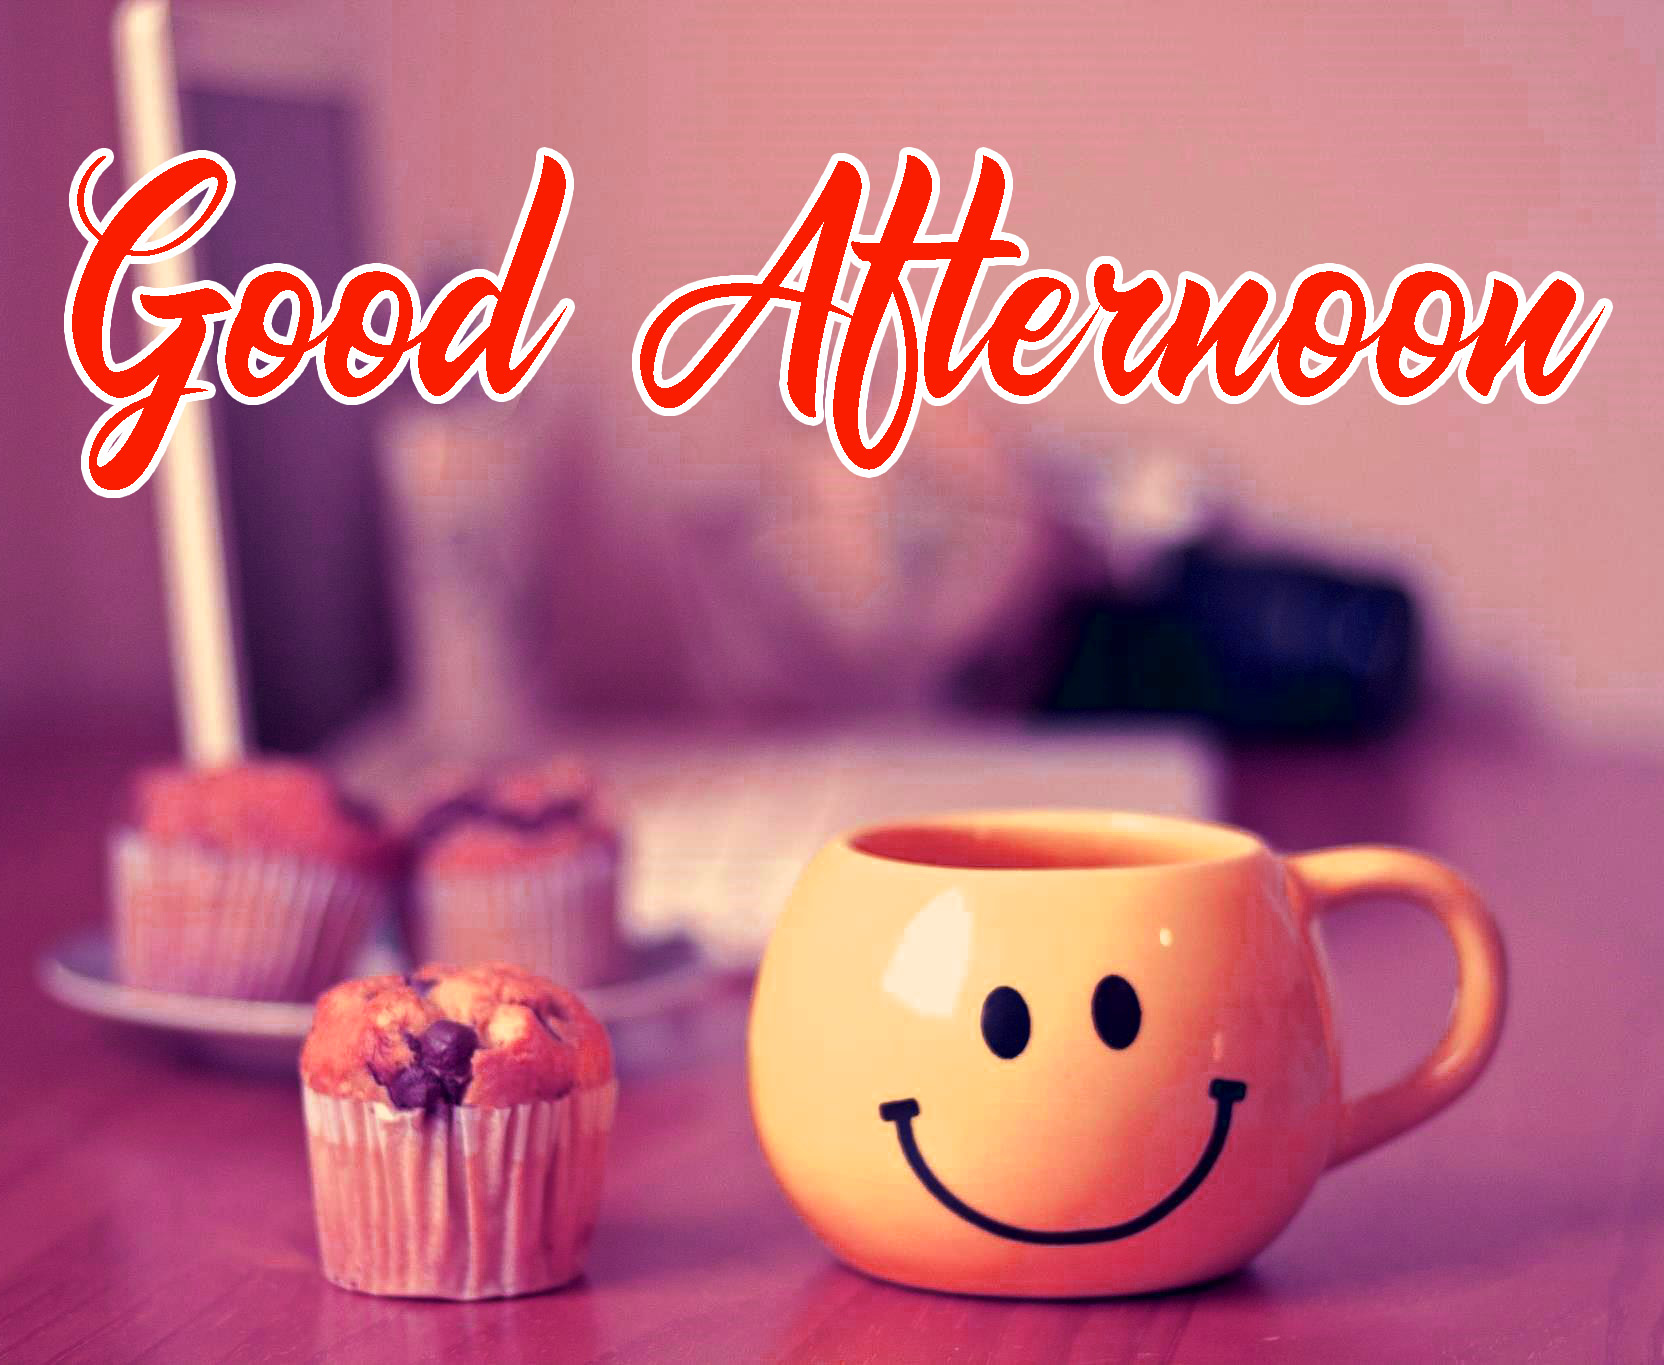 Good Afternoon HD Images Wallpaper Download 